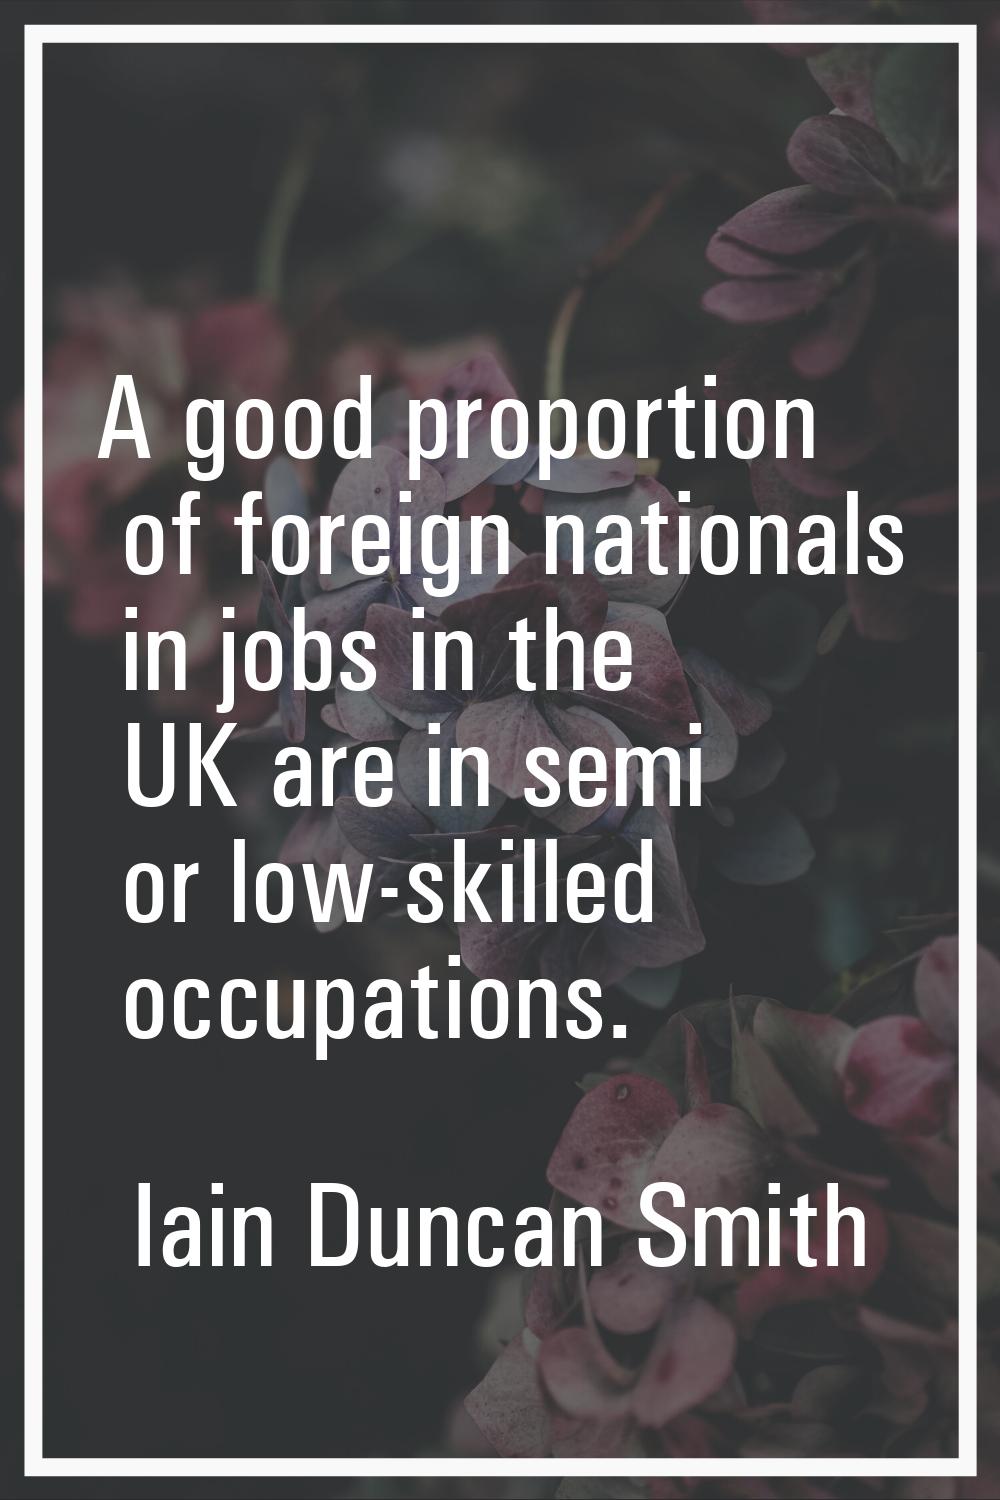 A good proportion of foreign nationals in jobs in the UK are in semi or low-skilled occupations.